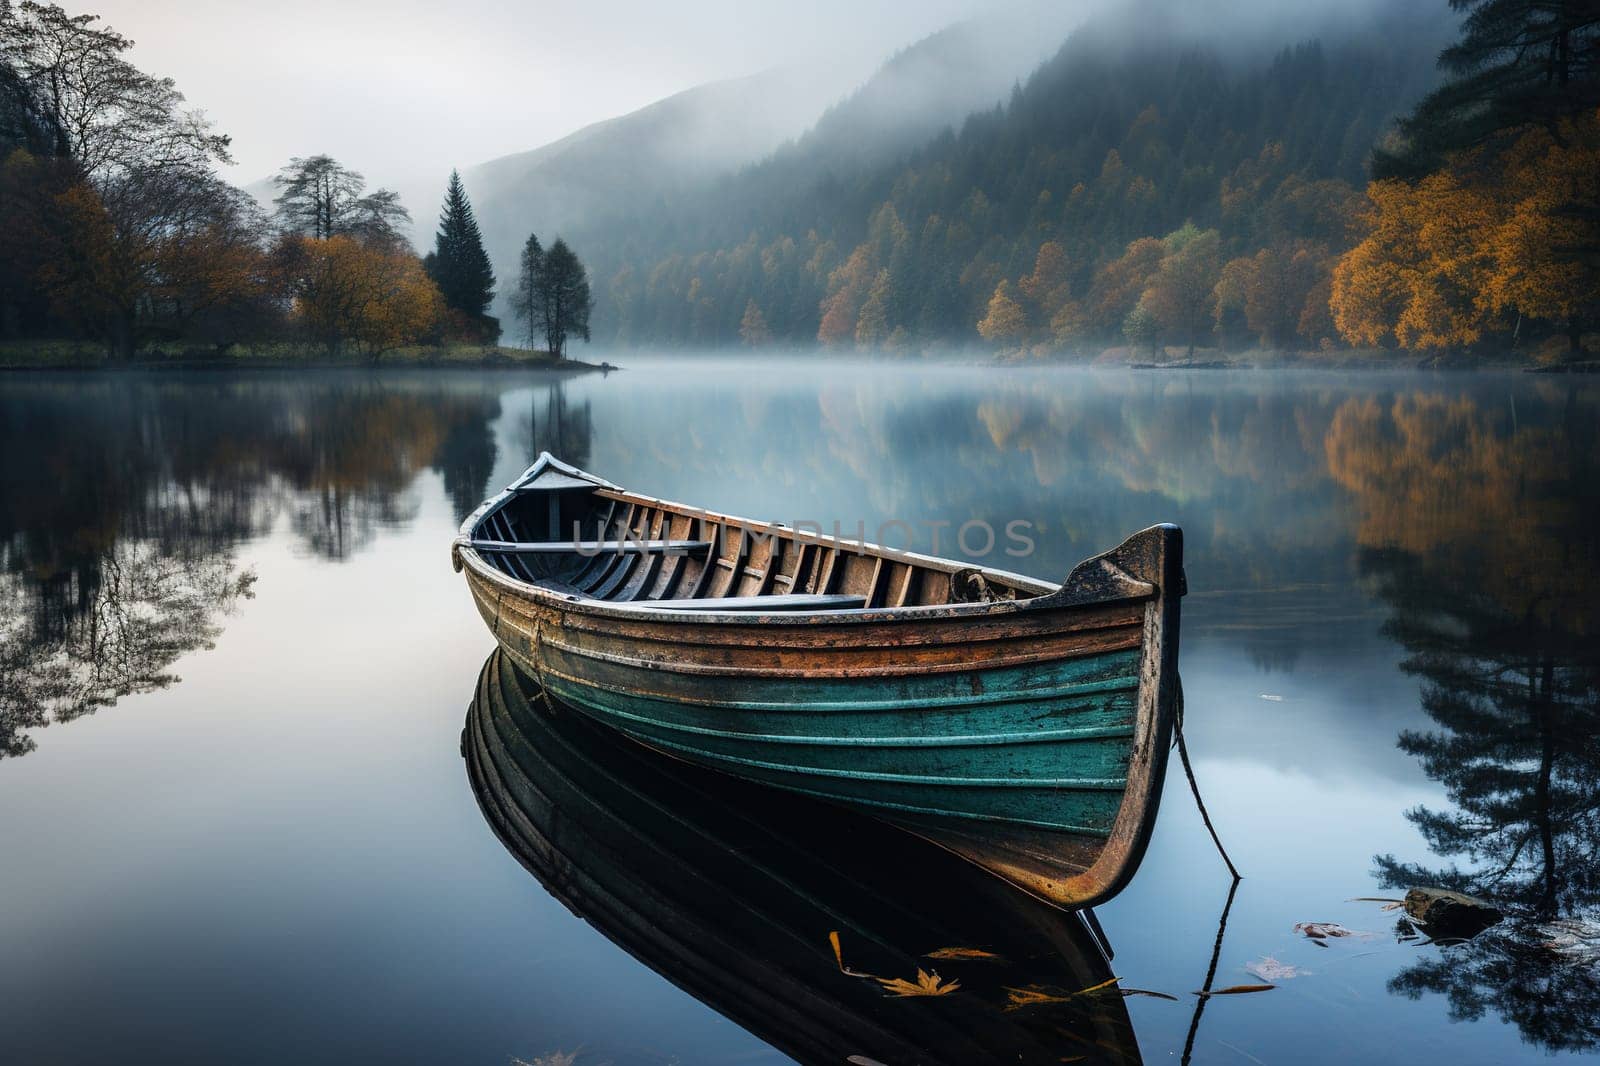 Old wooden boat in a foggy river in autumn.